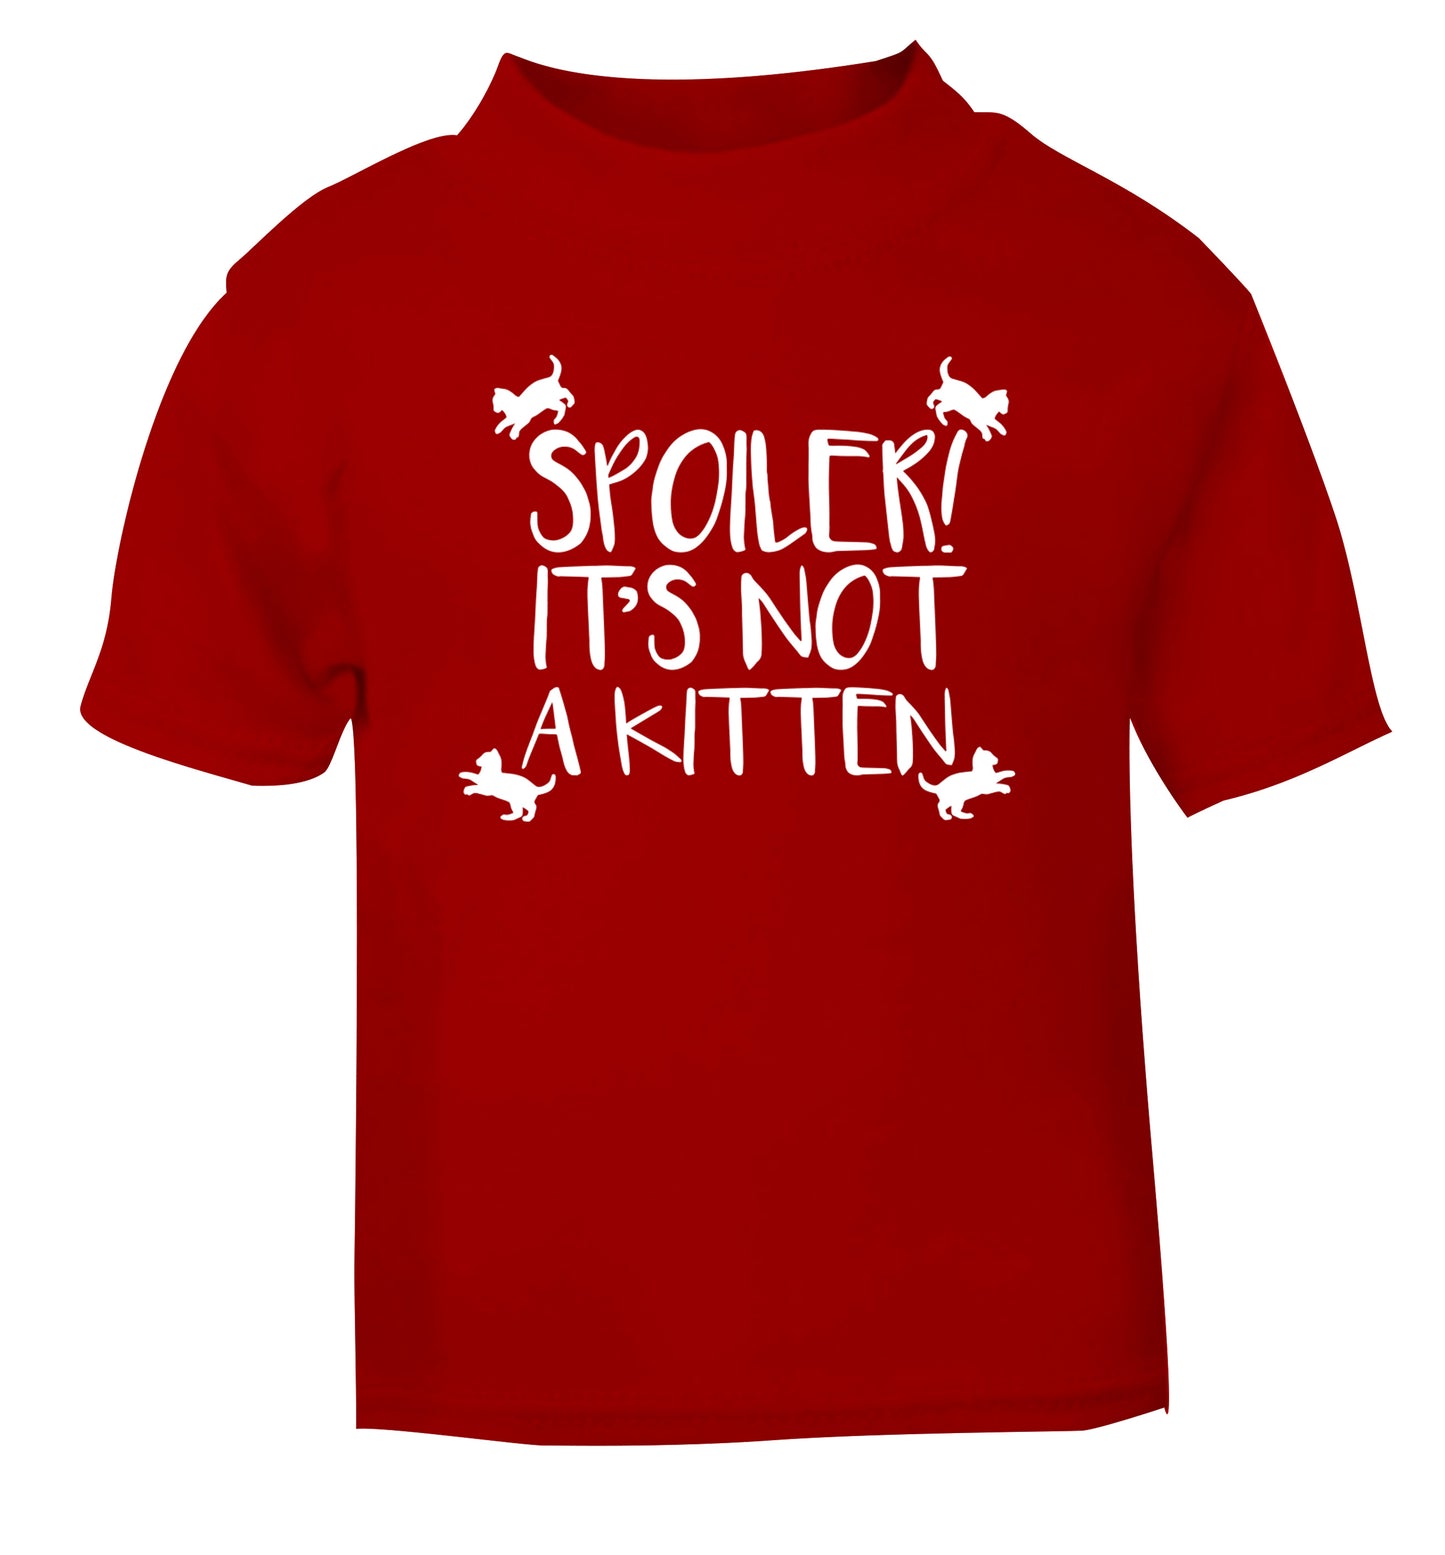 Spoiler it's not a kitten red Baby Toddler Tshirt 2 Years